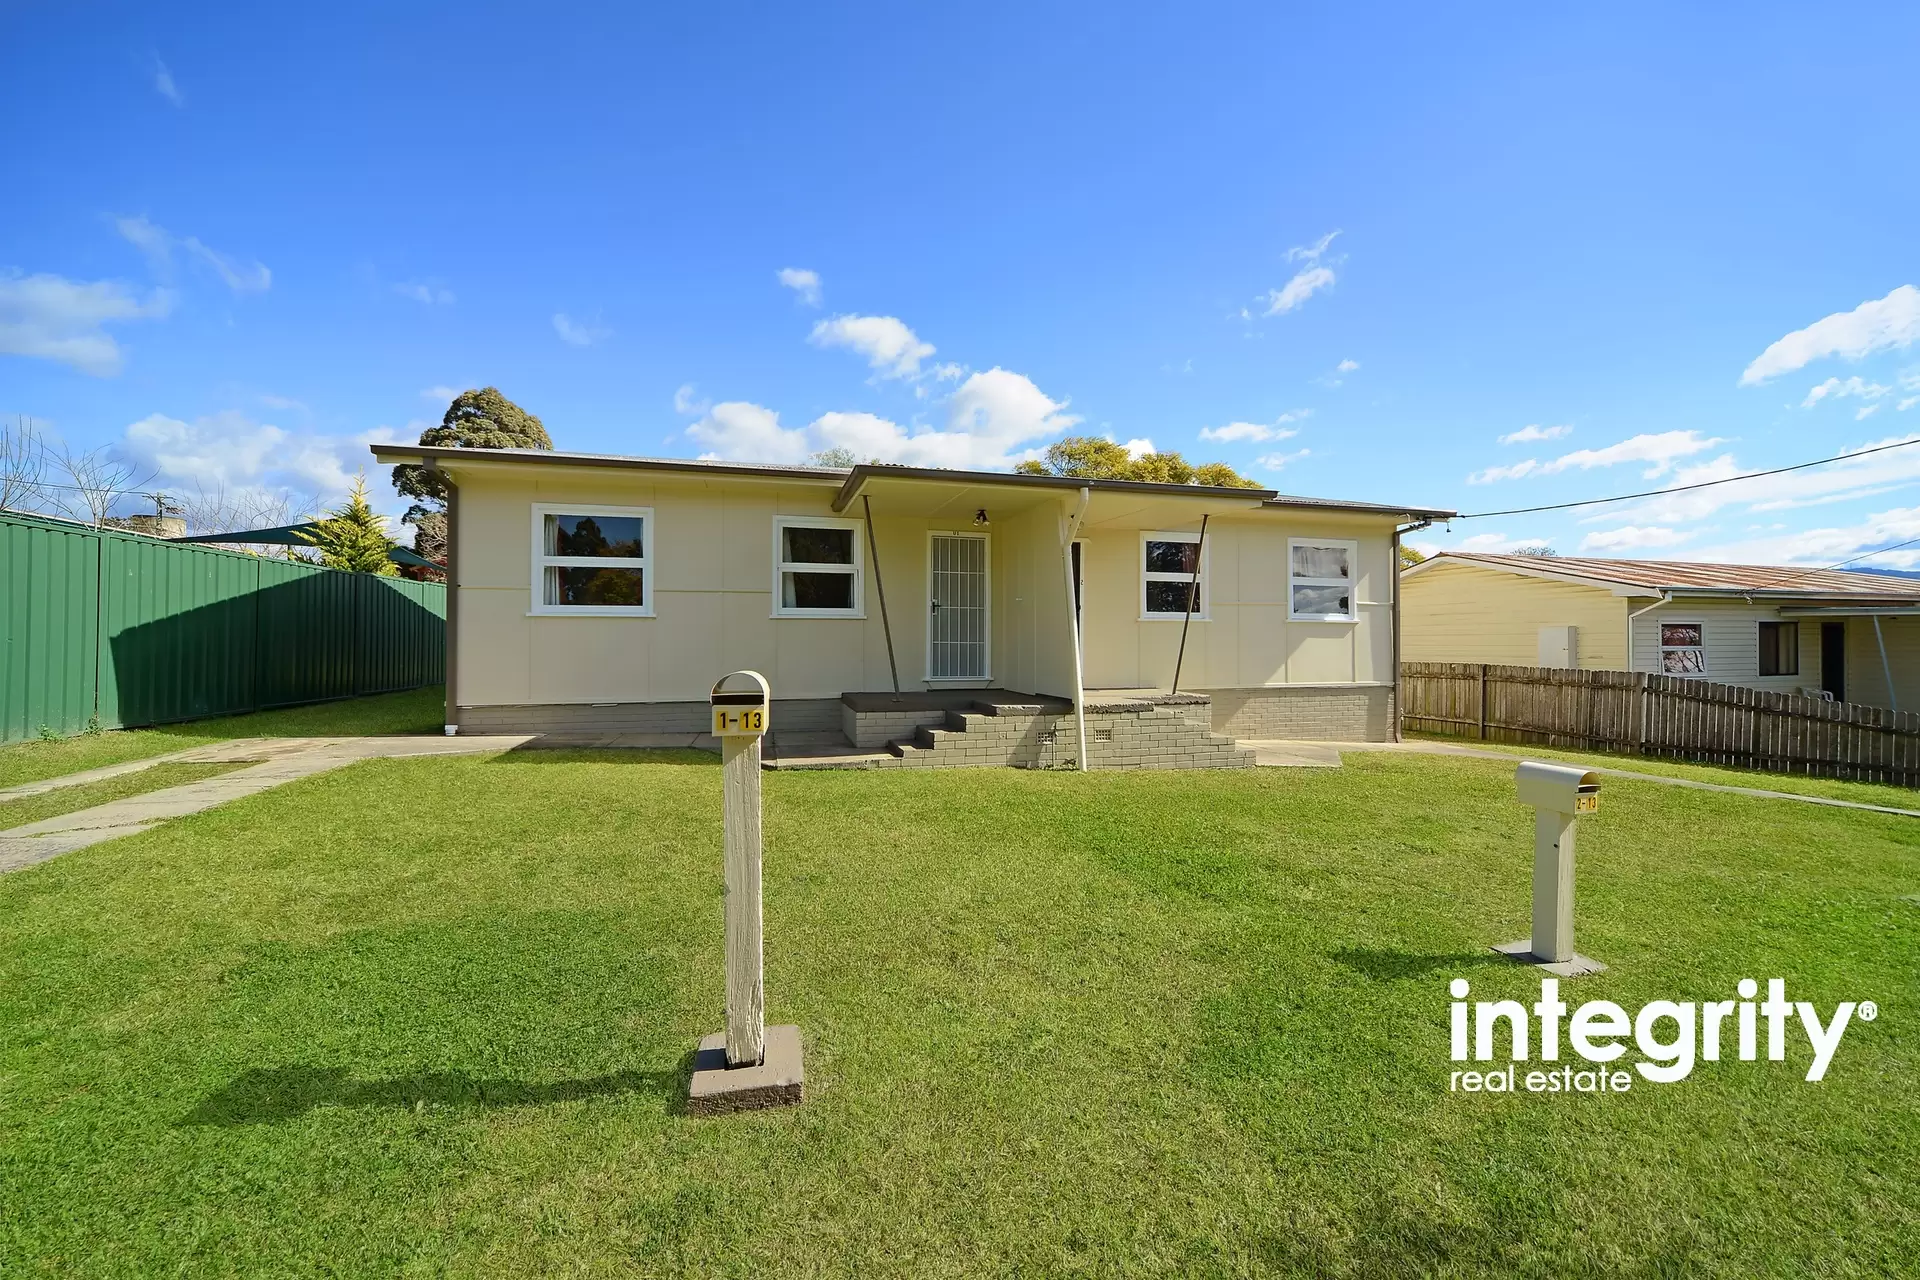 2/13 View Street, Nowra Leased by Integrity Real Estate